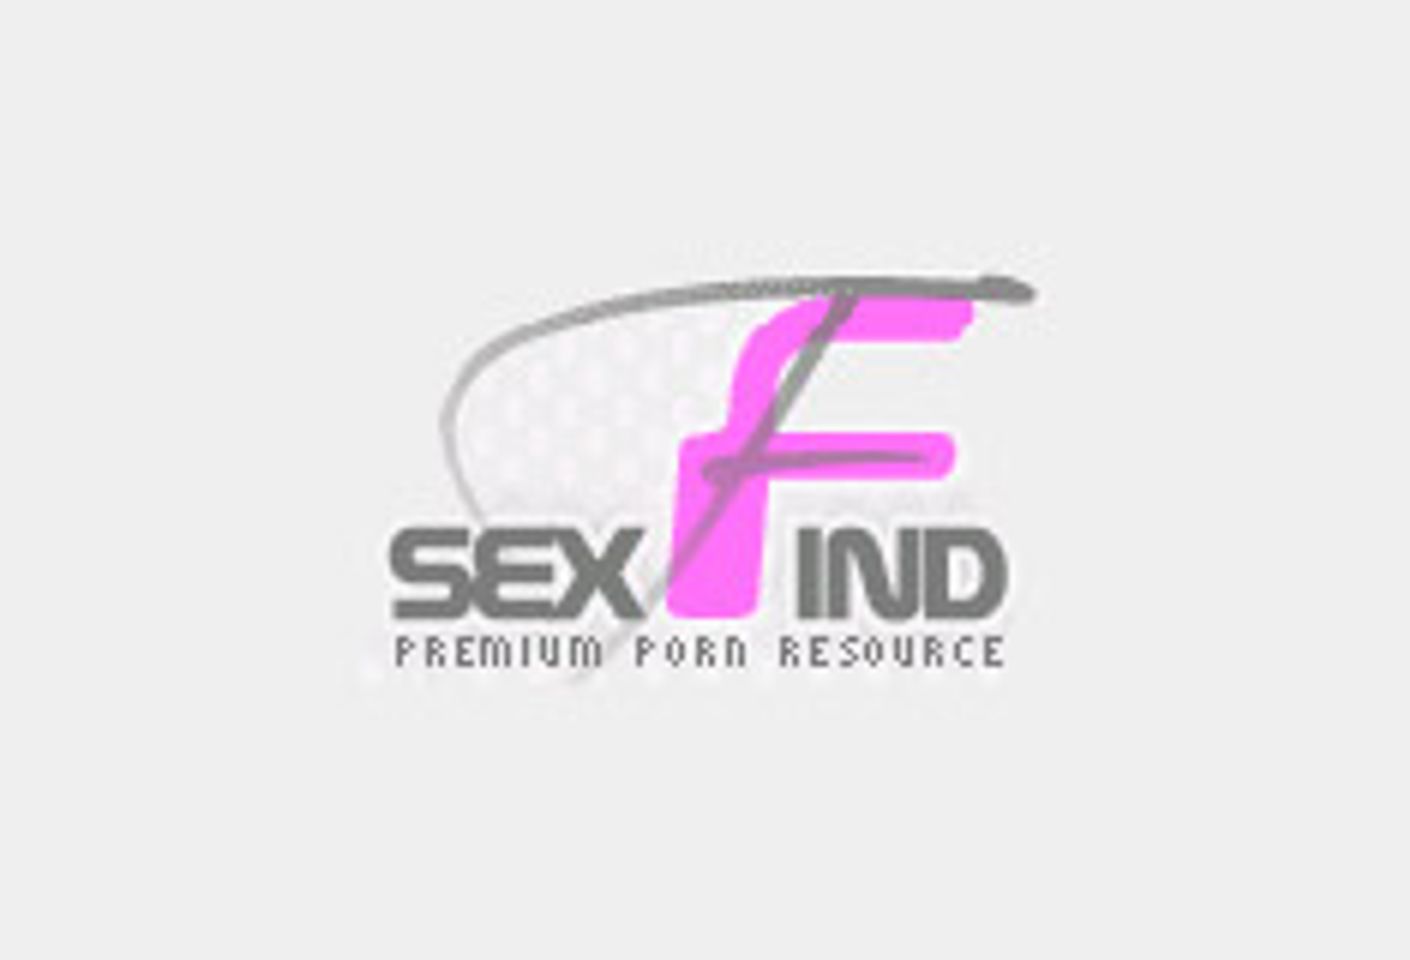 Premium Adult Search Engine Sex Find Launched